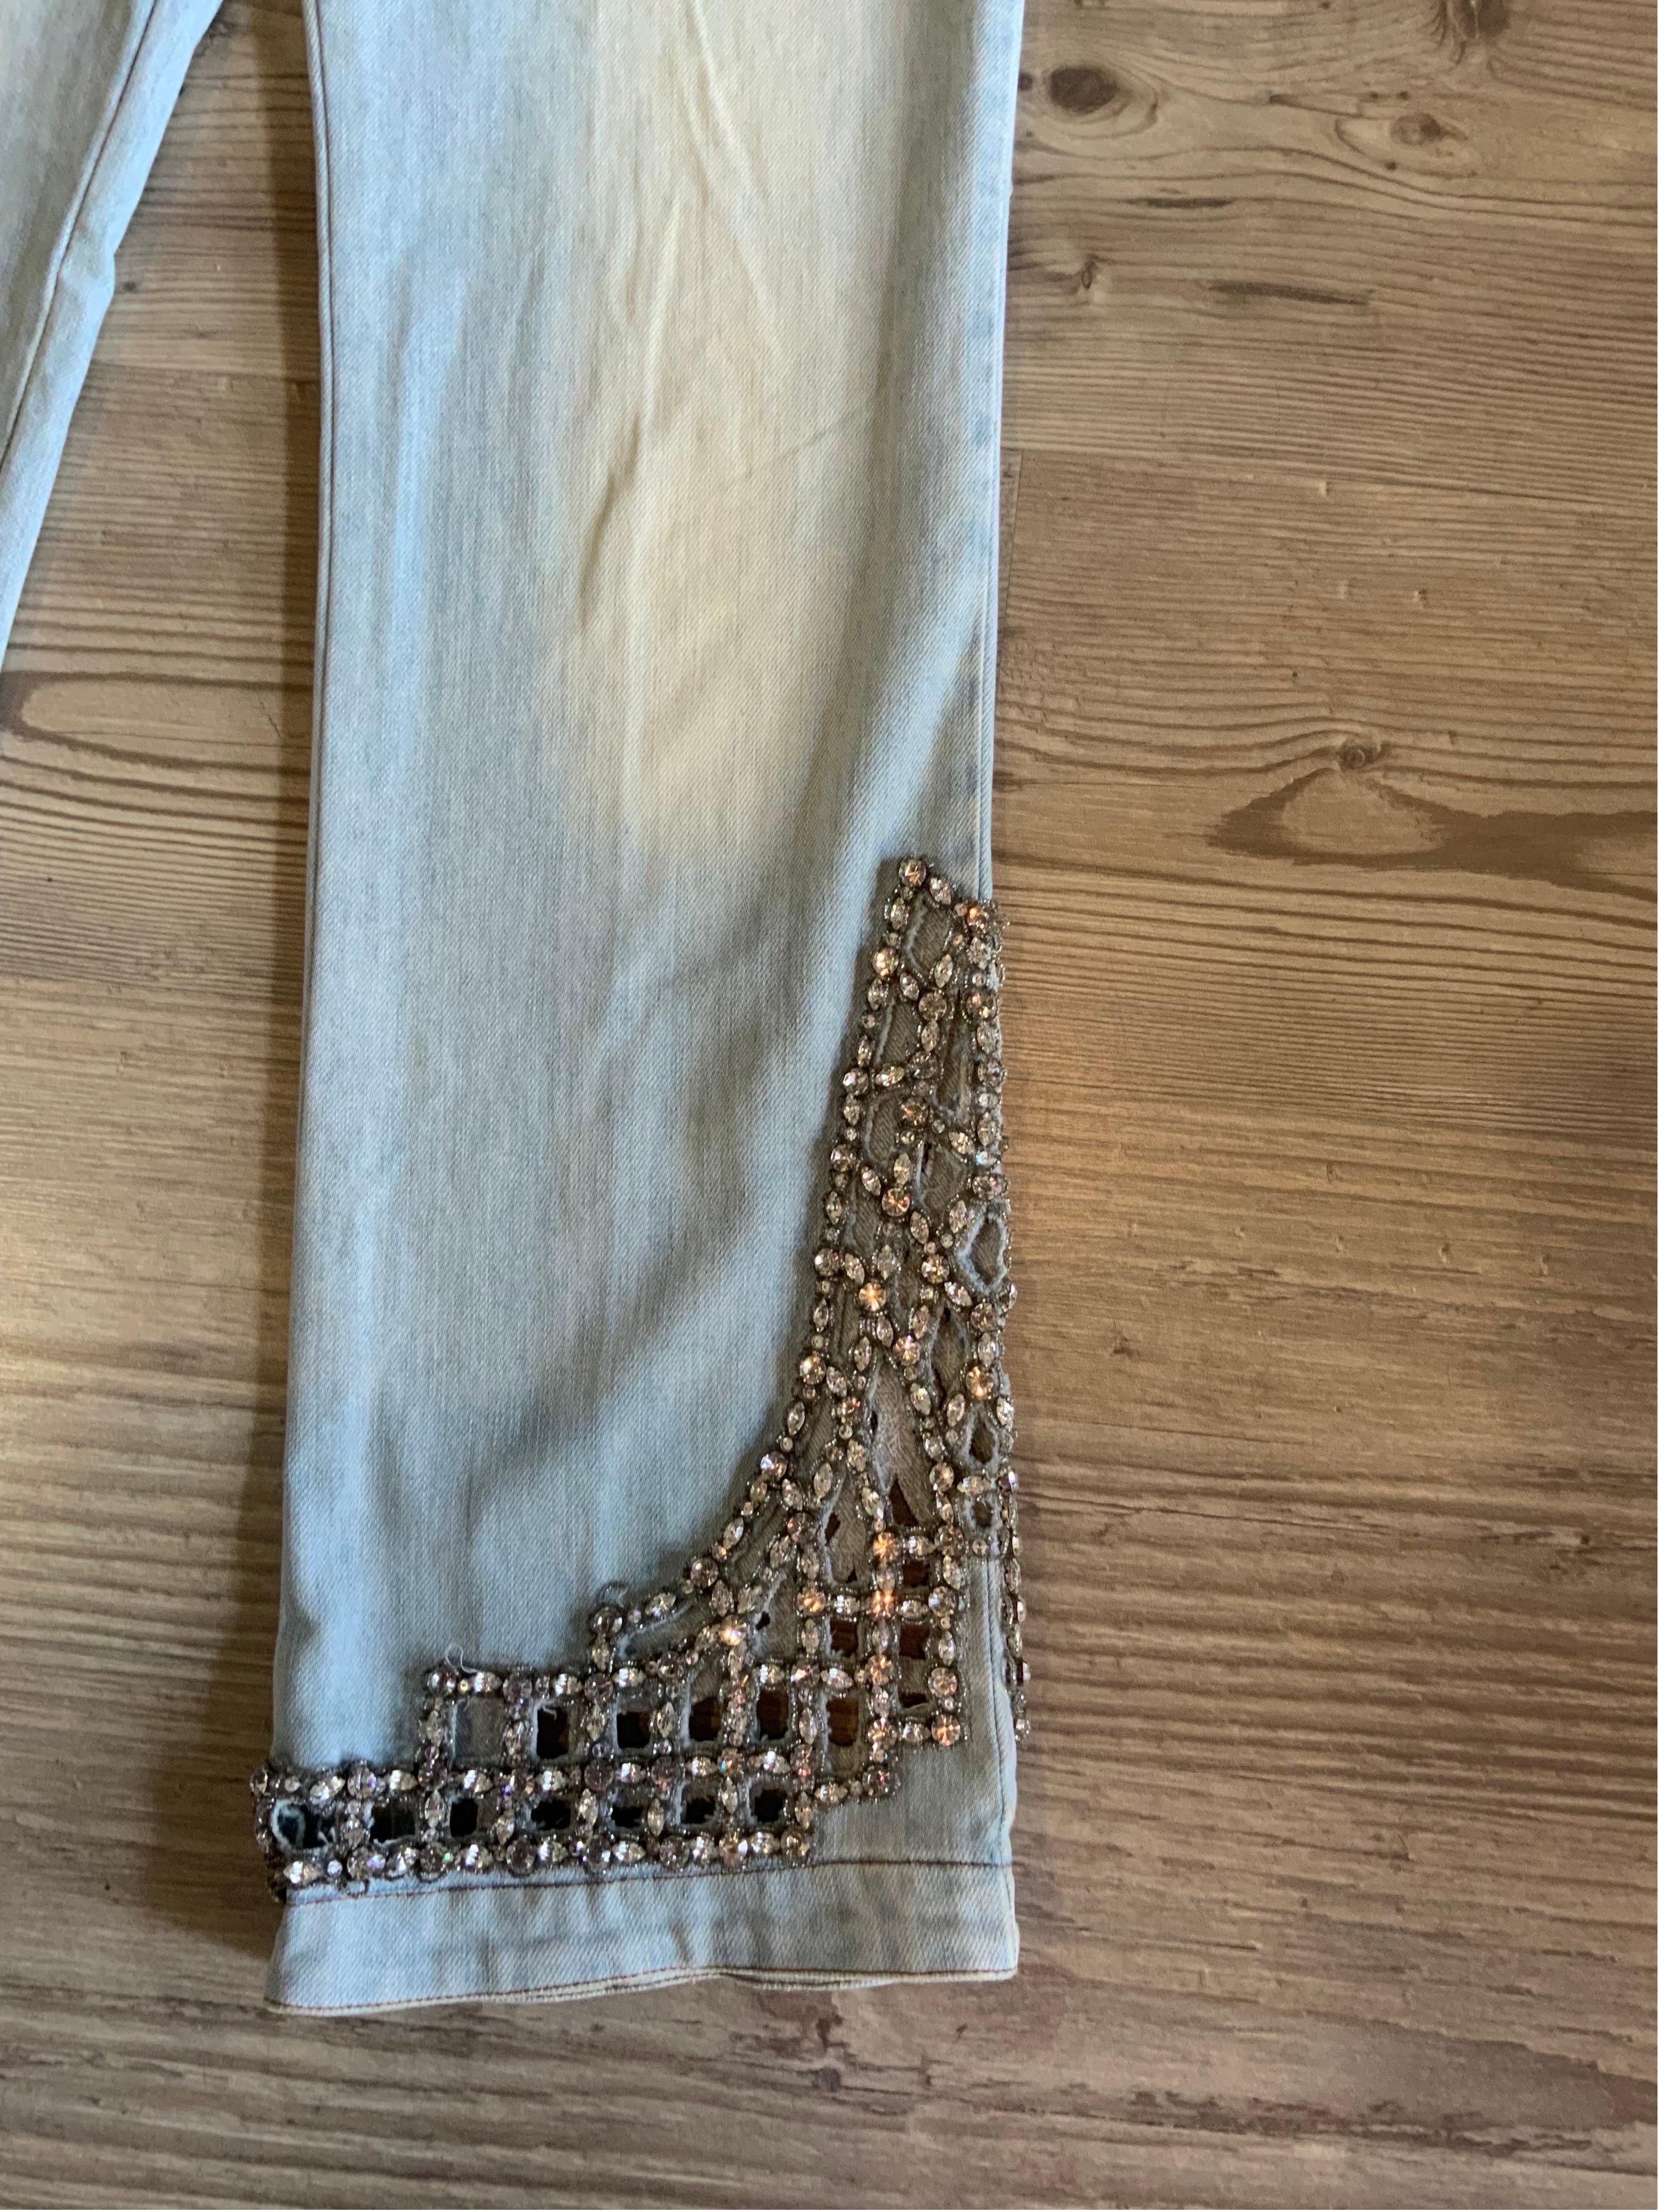 Roberto Cavalli Jewel light Jeans In Excellent Condition For Sale In Carnate, IT